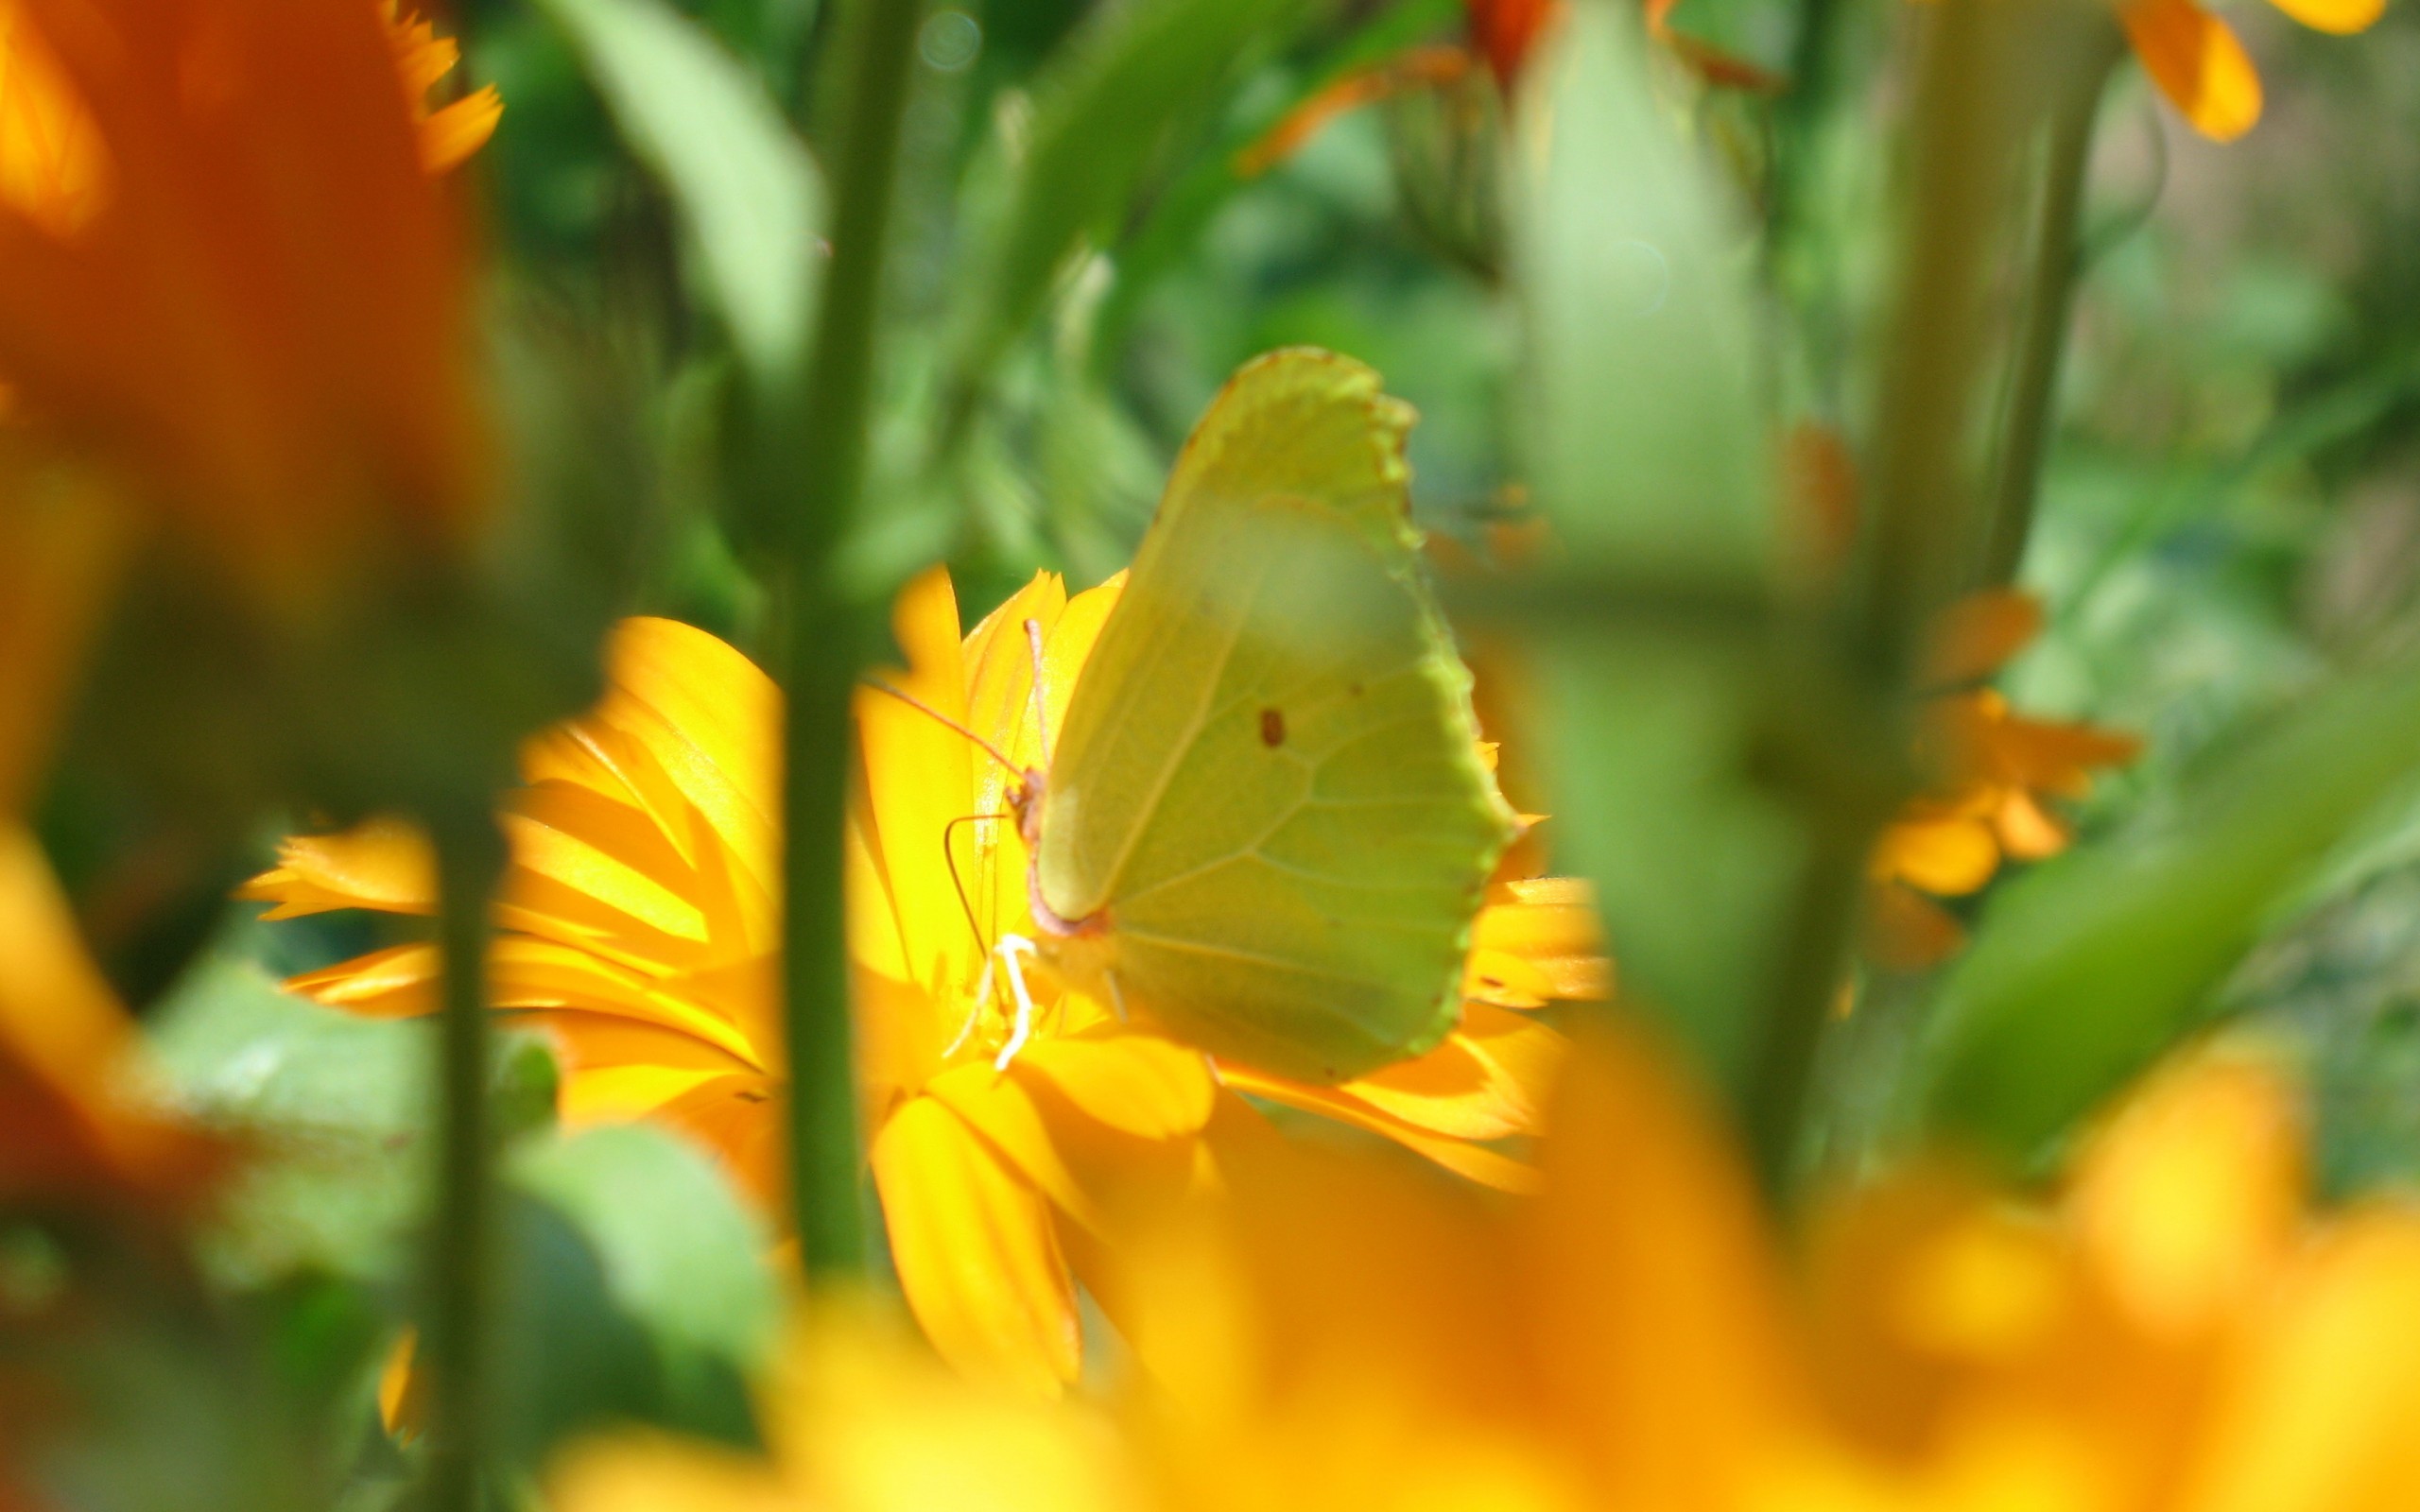 General 2560x1600 butterfly flowers yellow flowers photography animals insect plants closeup